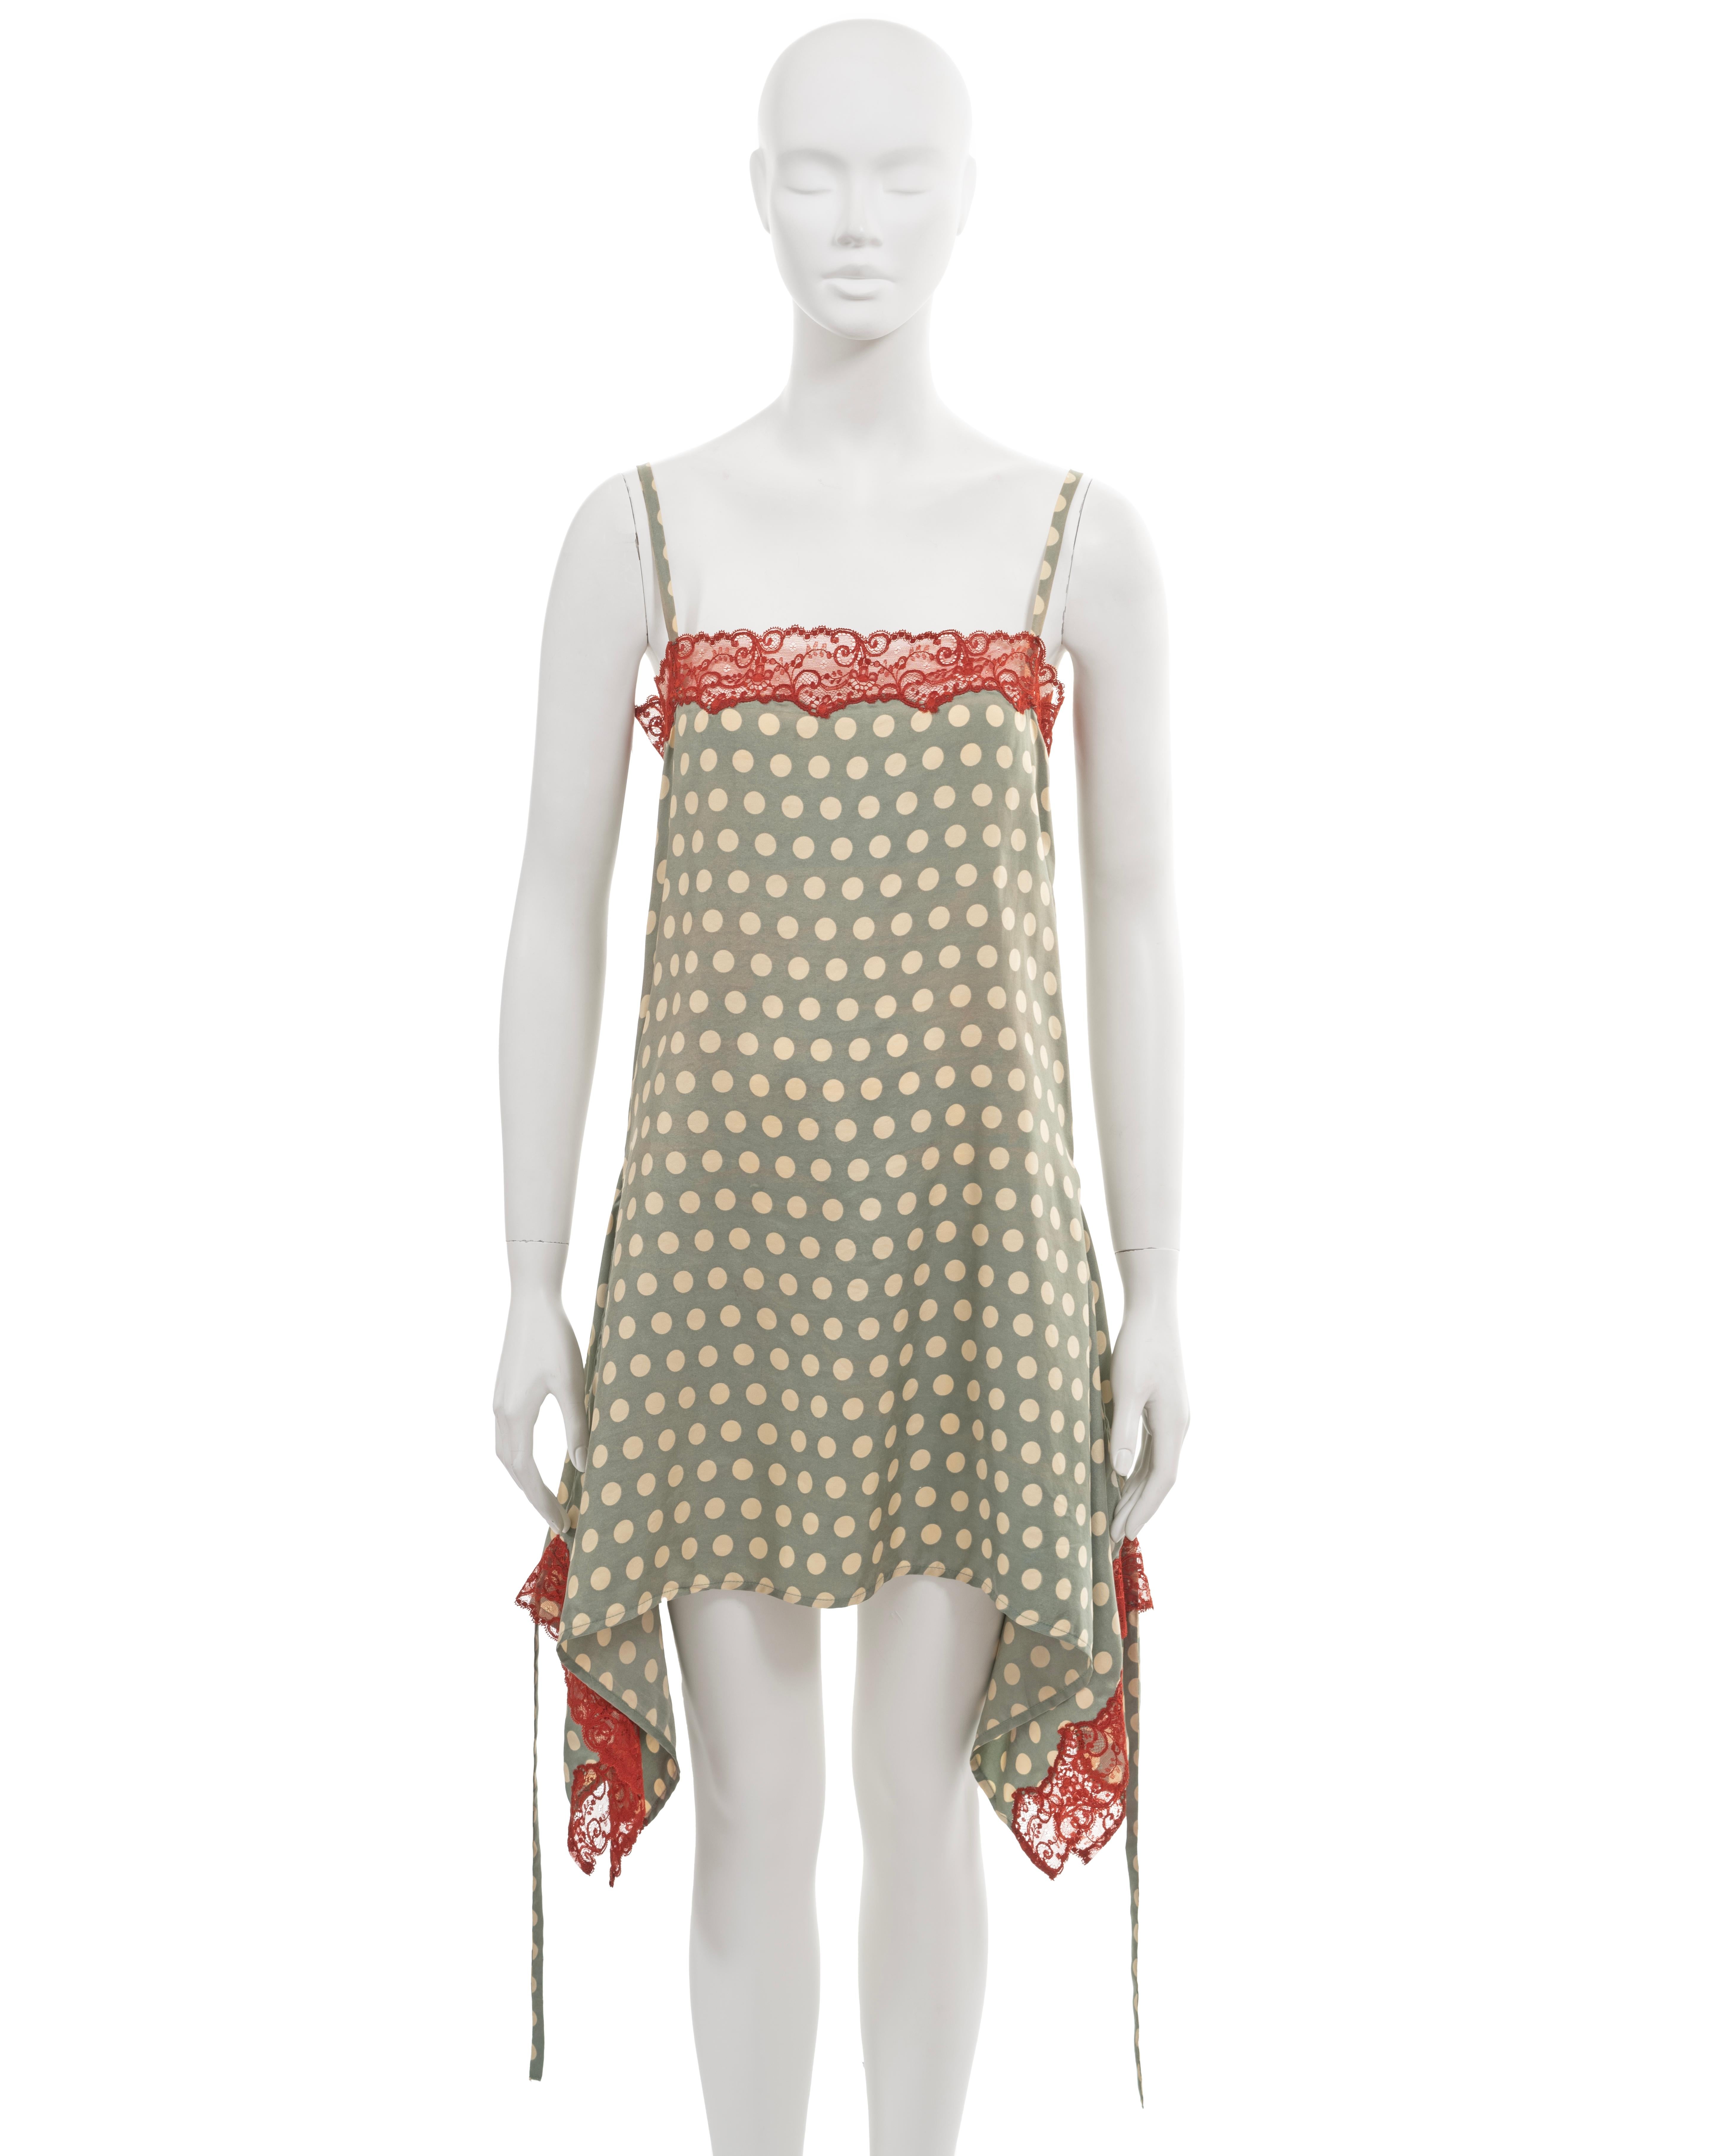 ▪ Archival Jean Paul Gaultier slip dress
▪ Spring-Summer 1992
▪ Sold by One of a Kind Archive
▪ Sage green silk with allover ivory polkadot motif
▪ Red lace trim featured on the neck and hemline
▪ The skirt has wider panels on the hips, that can be